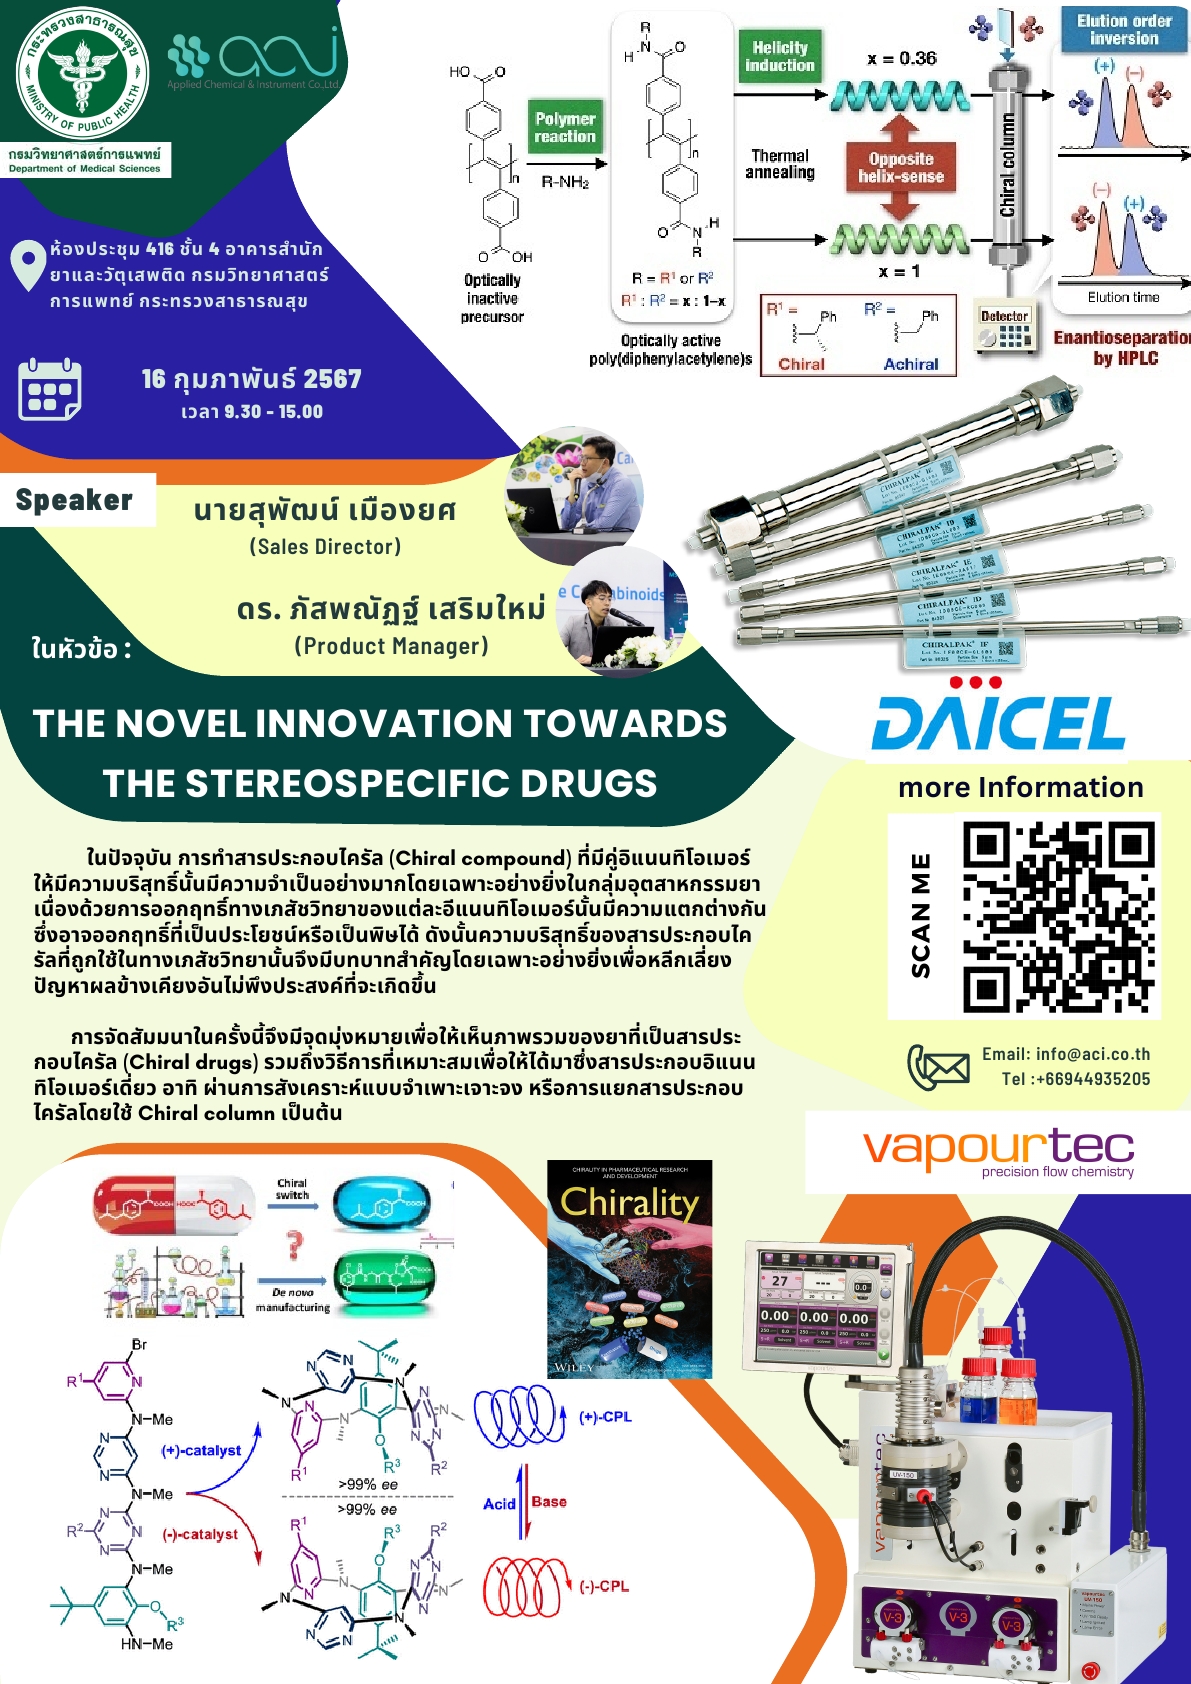 The Novel Innovation towards the Stereospecific Drugs